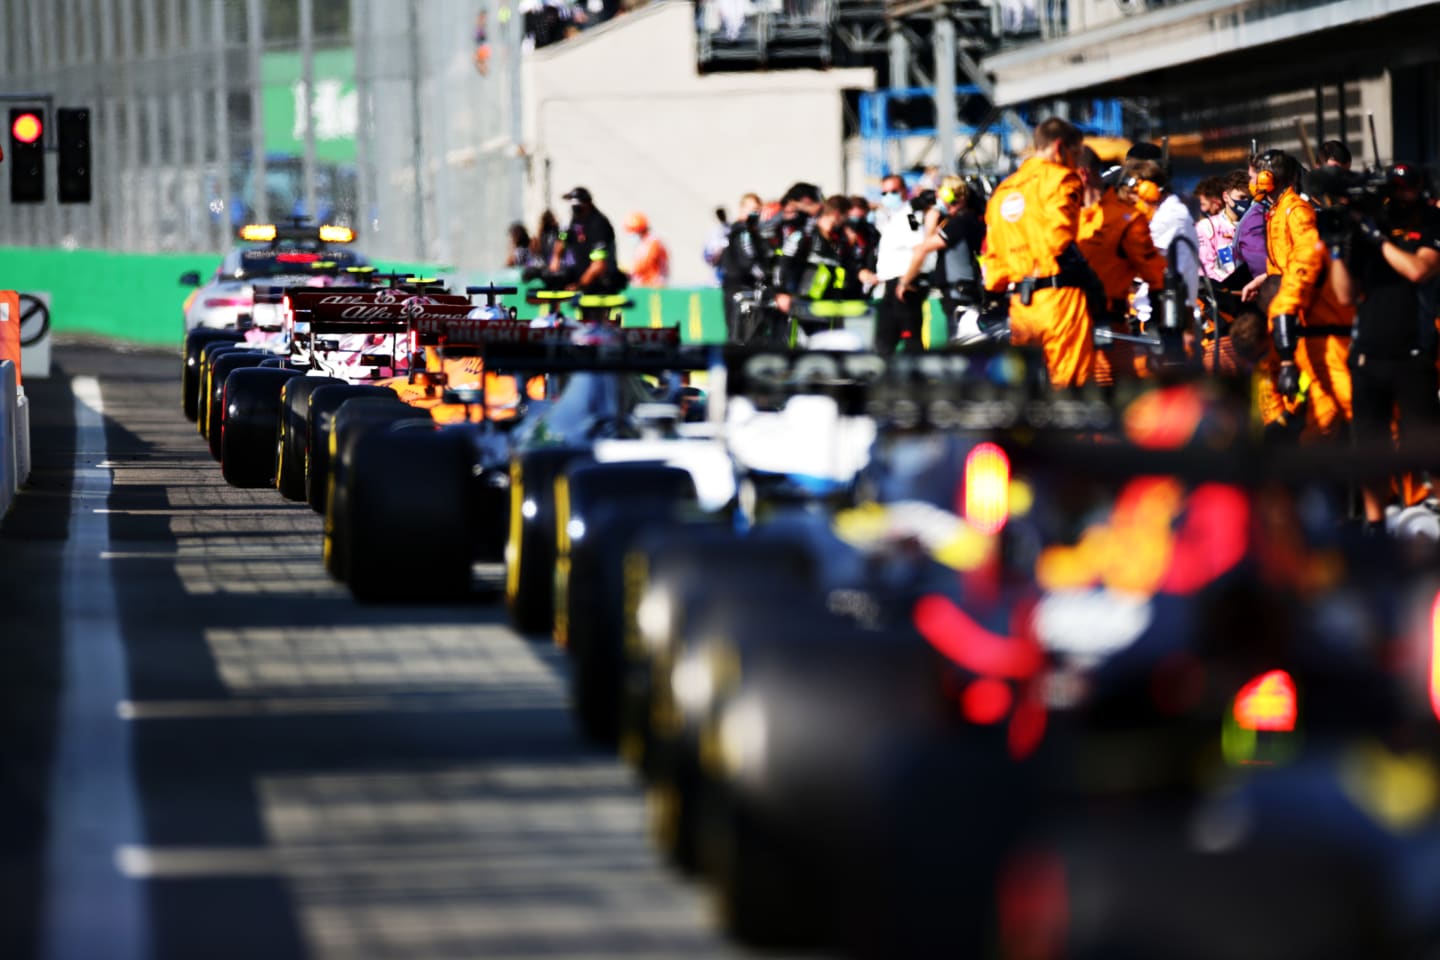 MONZA, ITALY - SEPTEMBER 06: Cars line up in the Pitlane before the restart during the F1 Grand